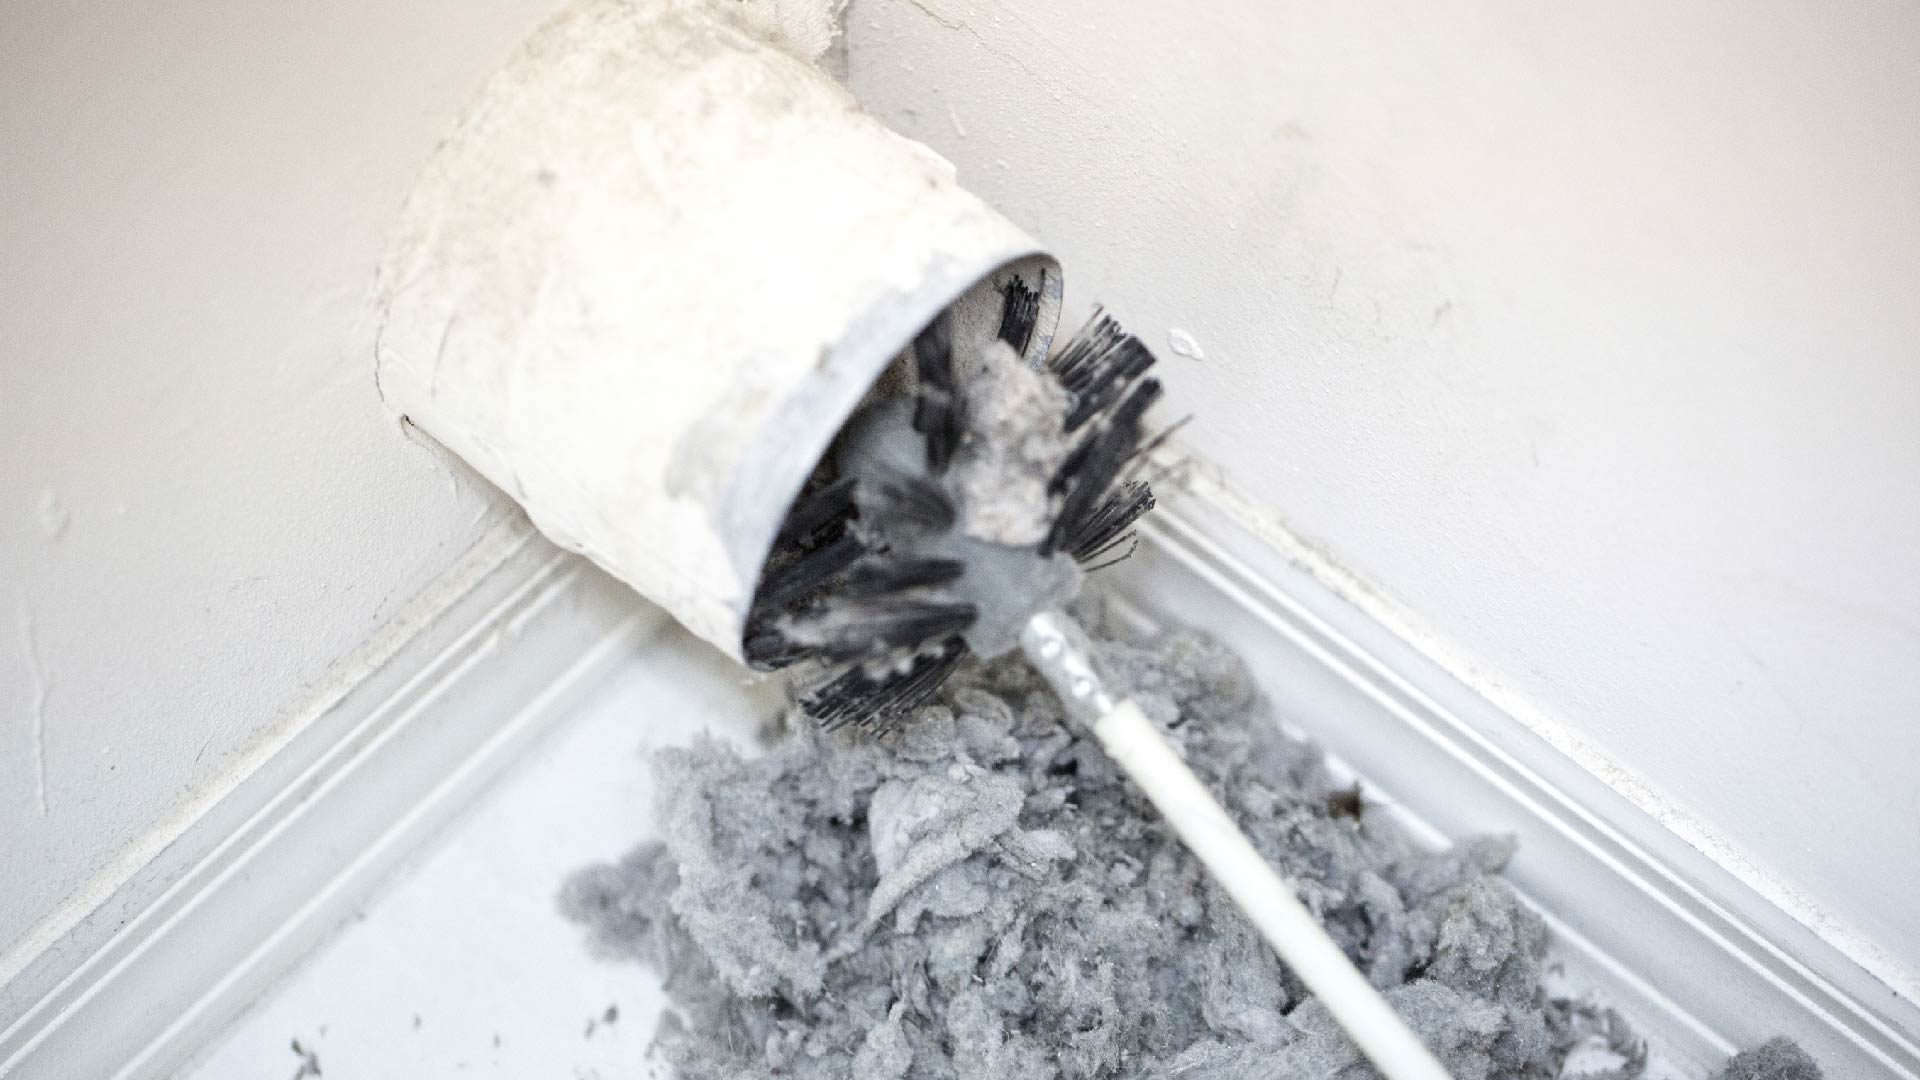 Dryer Vent Cleaning | S & R Air Duct Cleaning Services